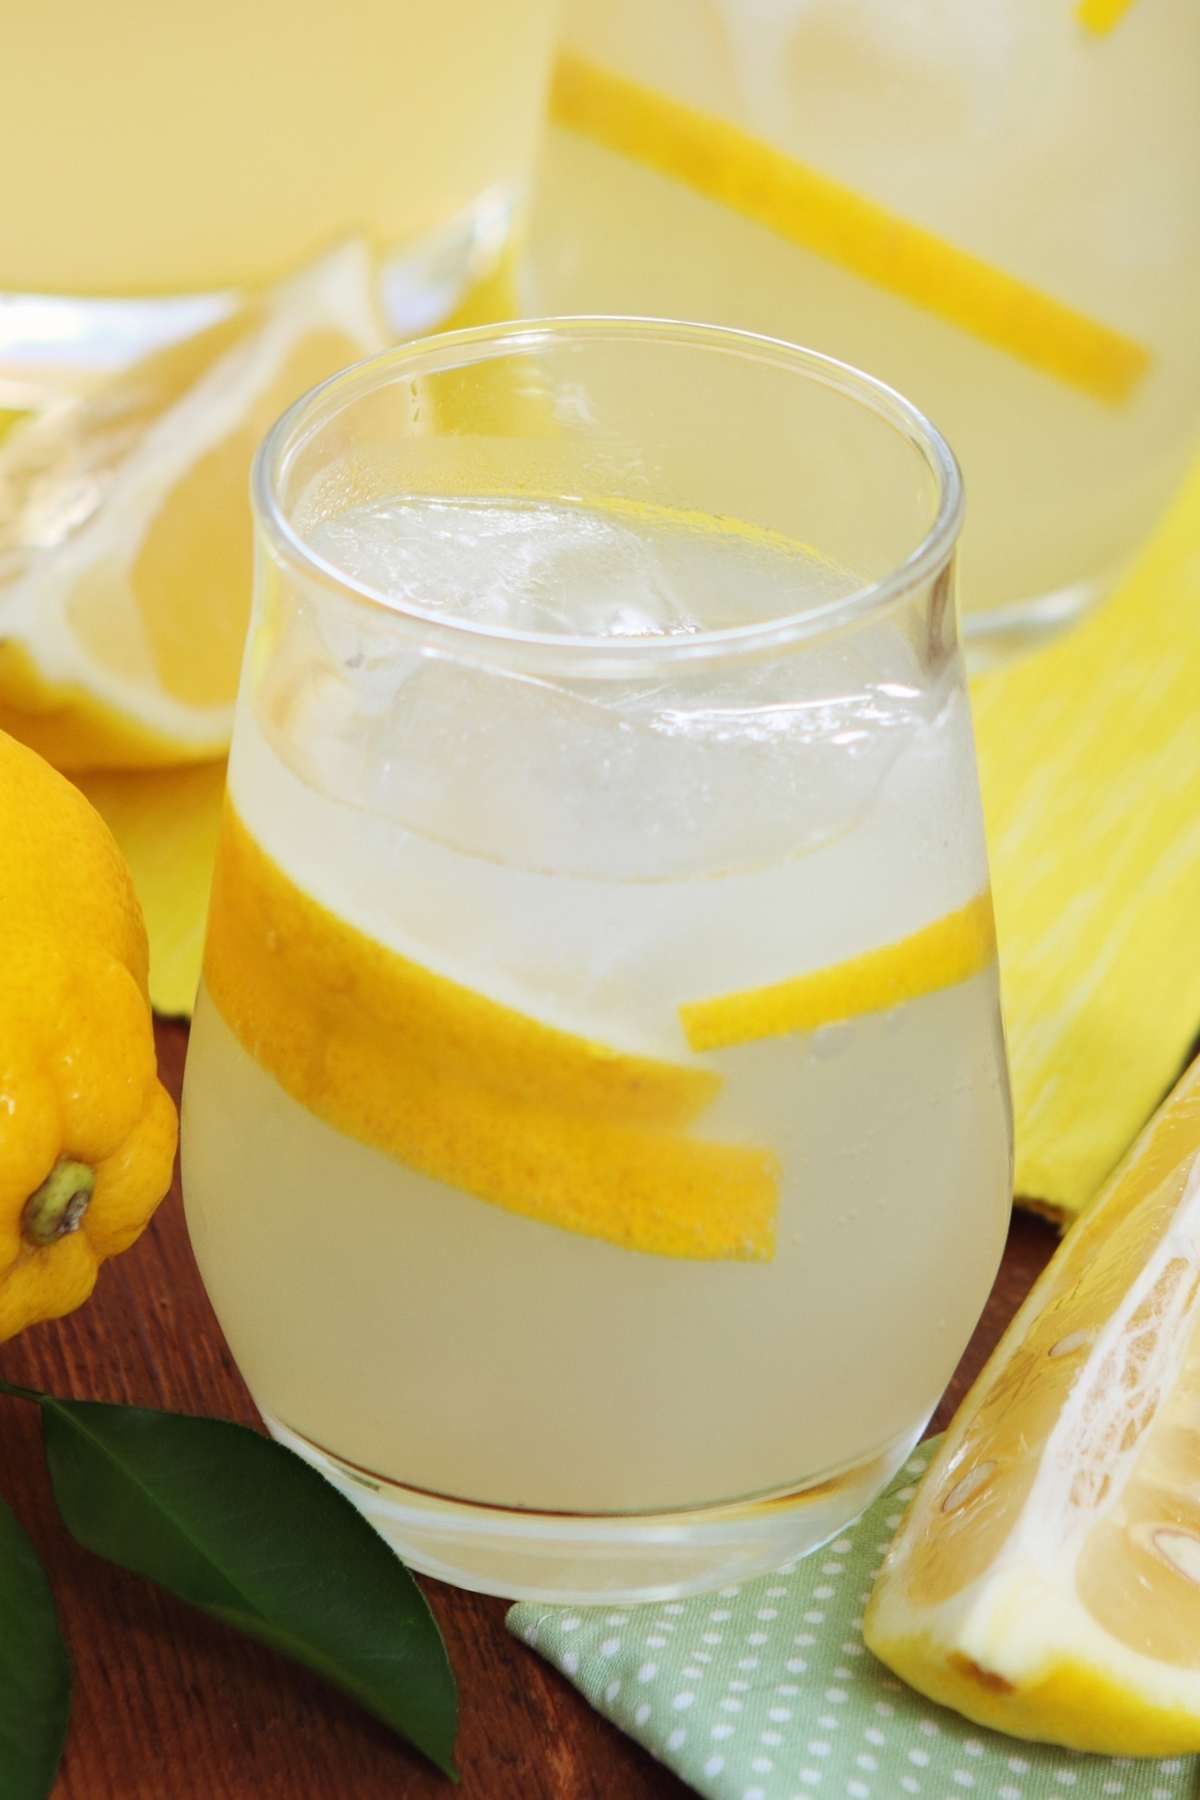 This tequila lemonade is perfect for summer get-togethers outside on the patio or in the garden. It’s zesty, refreshing and features the delicious and distinctive flavor of tequila.